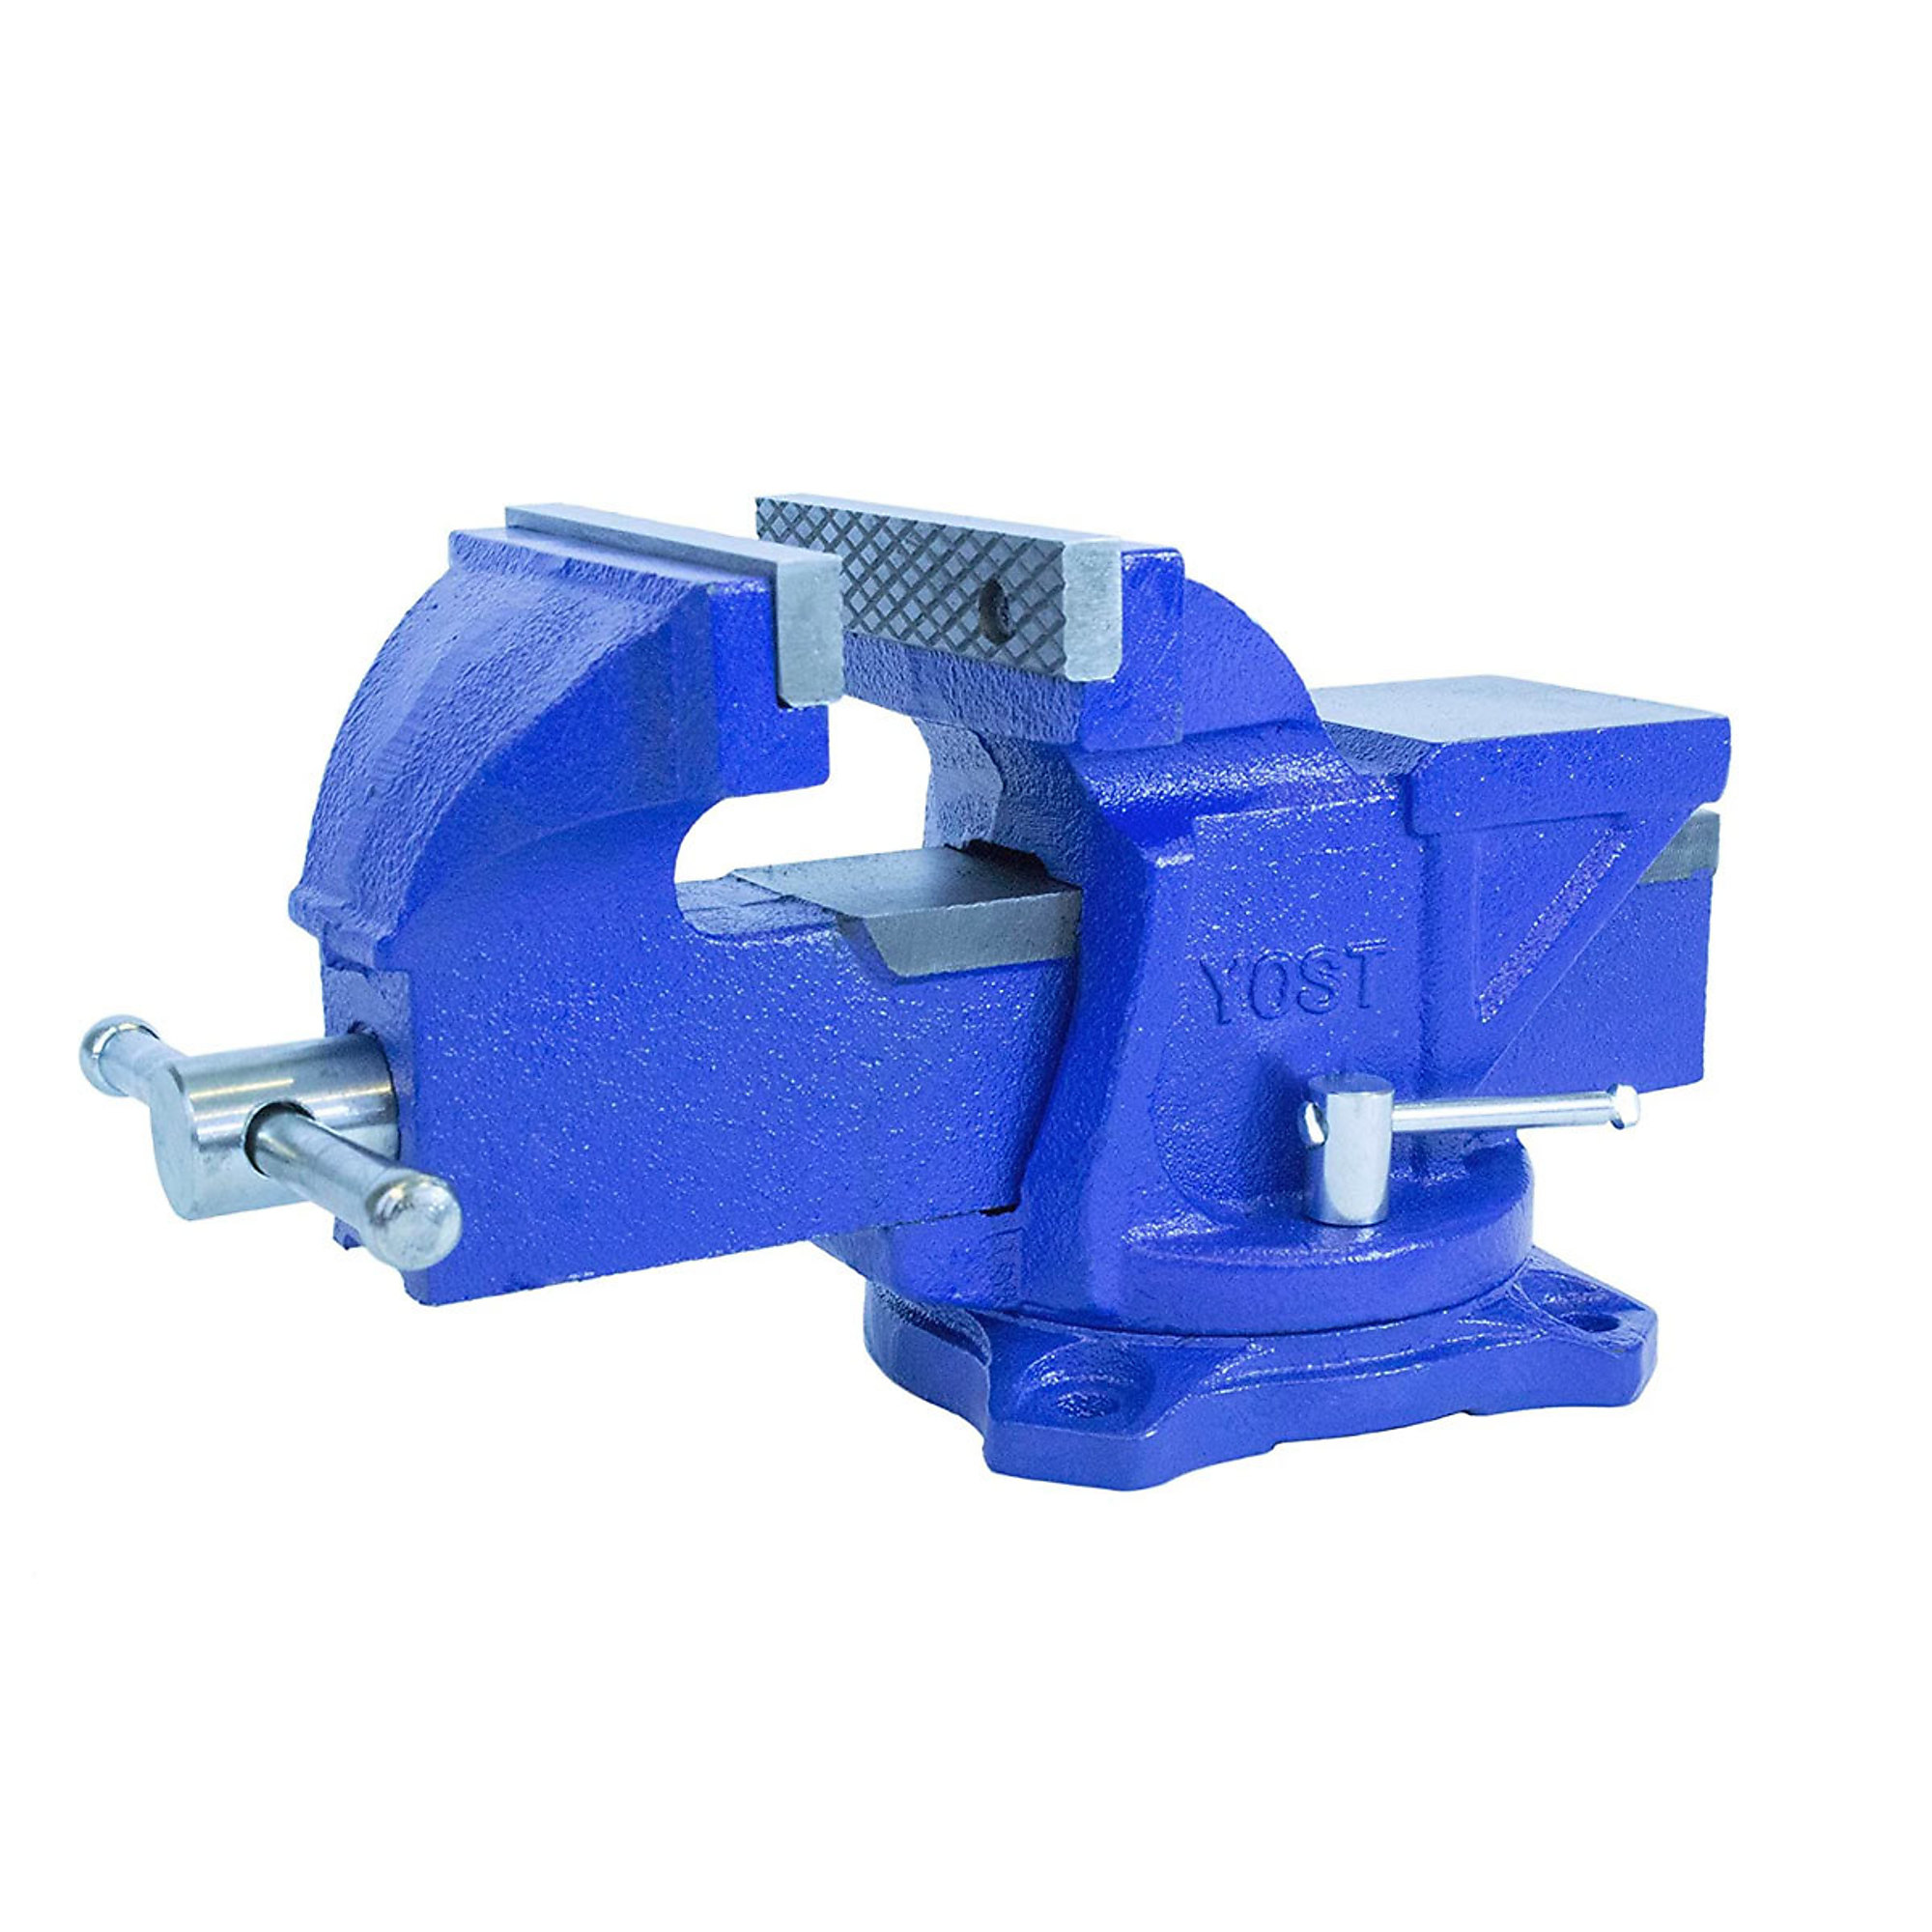 Yost Vises, 6Inch Utility Bench Vise, Jaw Width 5.875 in, Jaw Capacity 6 in, Material Iron, Model BV-6